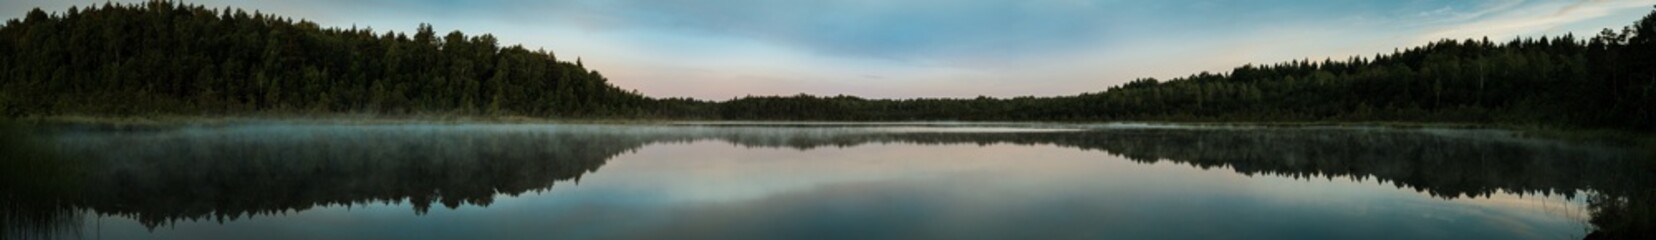 Panorama of a small swamp lake in the morning during sunrise
